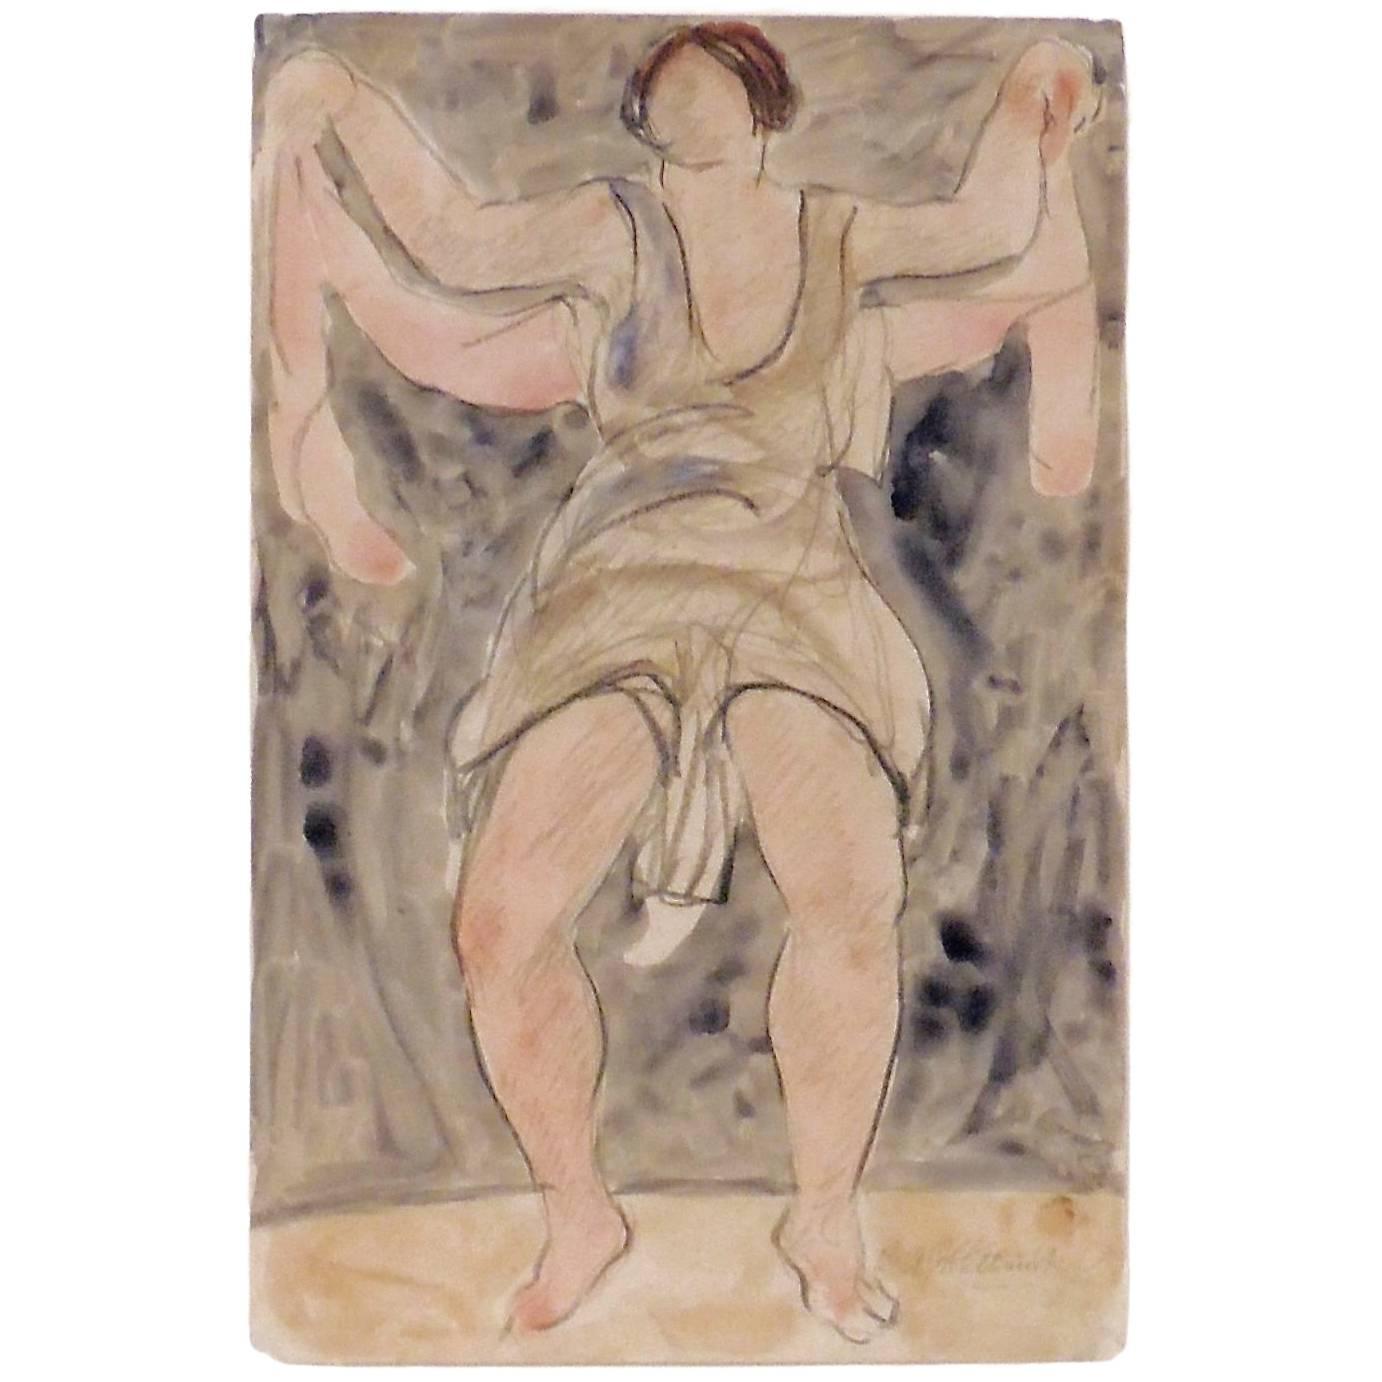 Modernist Watercolored Drawing of Dancer Isadora Duncan, by Abraham Walkowitz